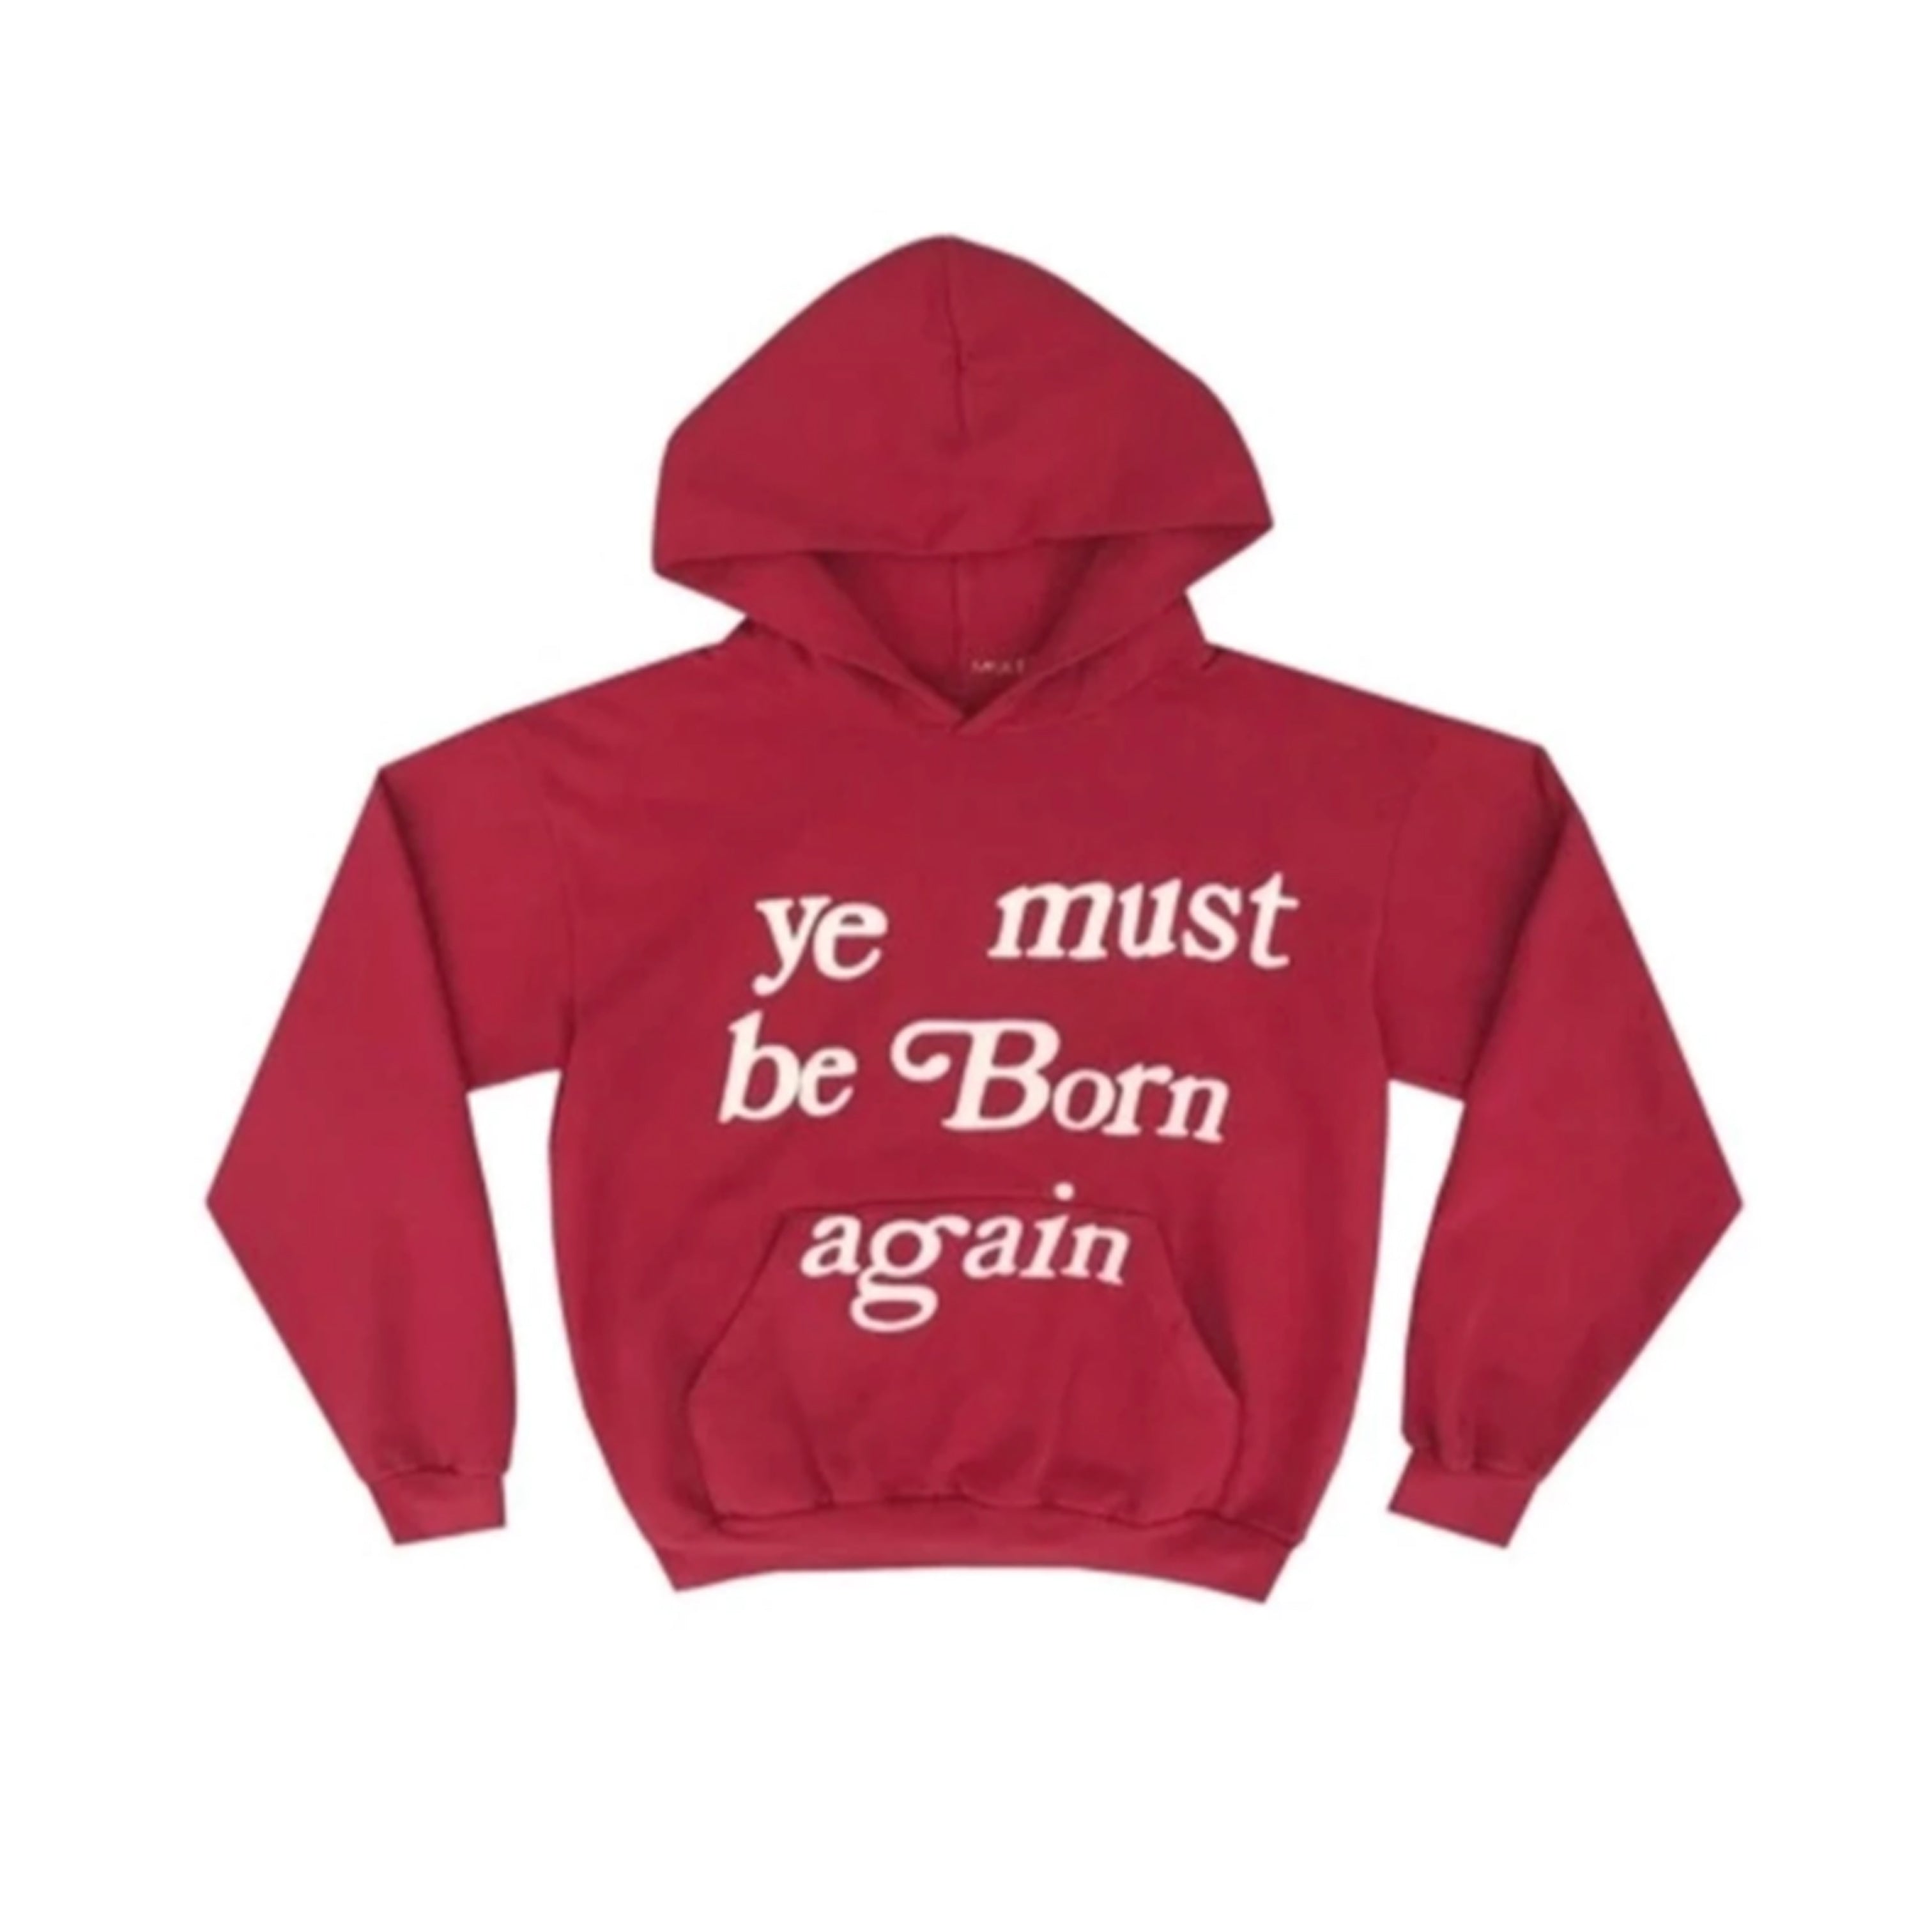 CPFM Hoodie "YE MUST BE BORN AGAIN" Red New Size S